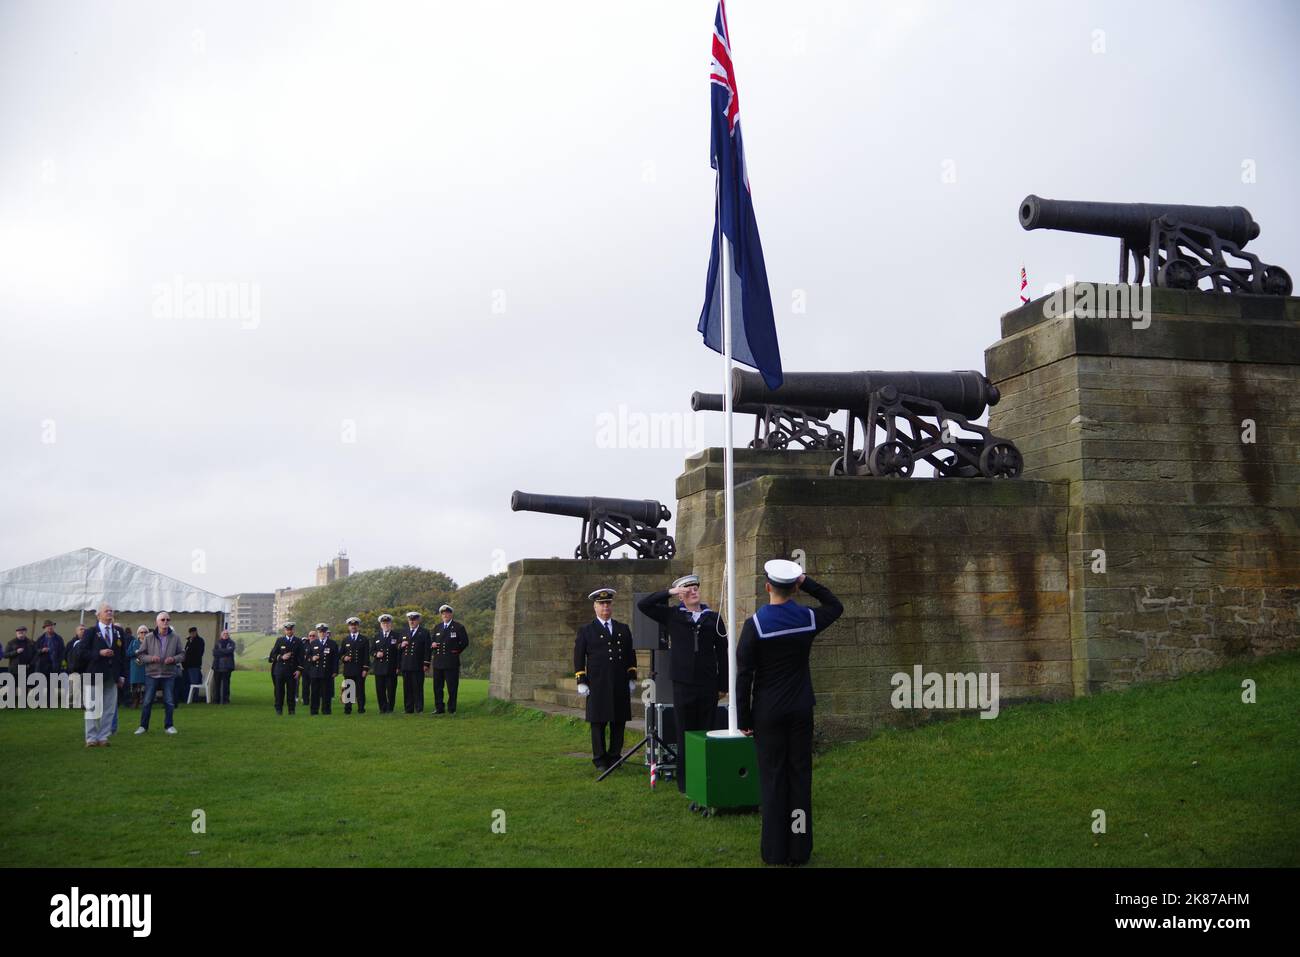 Tynemouth,UK. 21 October 2022. The blue ensign is raised during the Toast to Collingwood event at his monument in Tynemouth to celebrate the anniversary of Trafalgar. Credit: Colin Edwards/Alamy Live News. Stock Photo